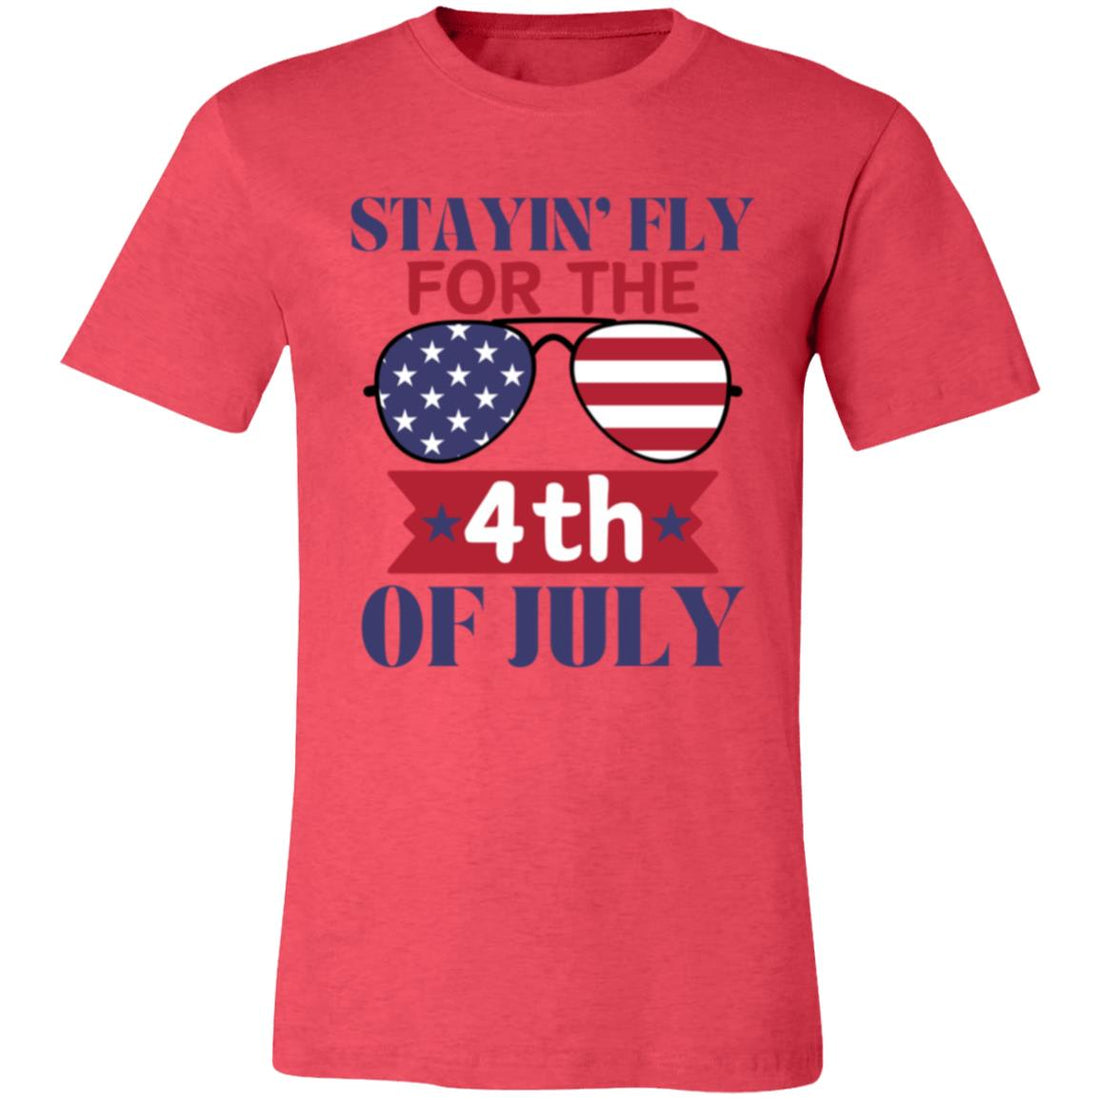 Stayin Fly T-Shirt - T-Shirts - Positively Sassy - Stayin Fly T-Shirt